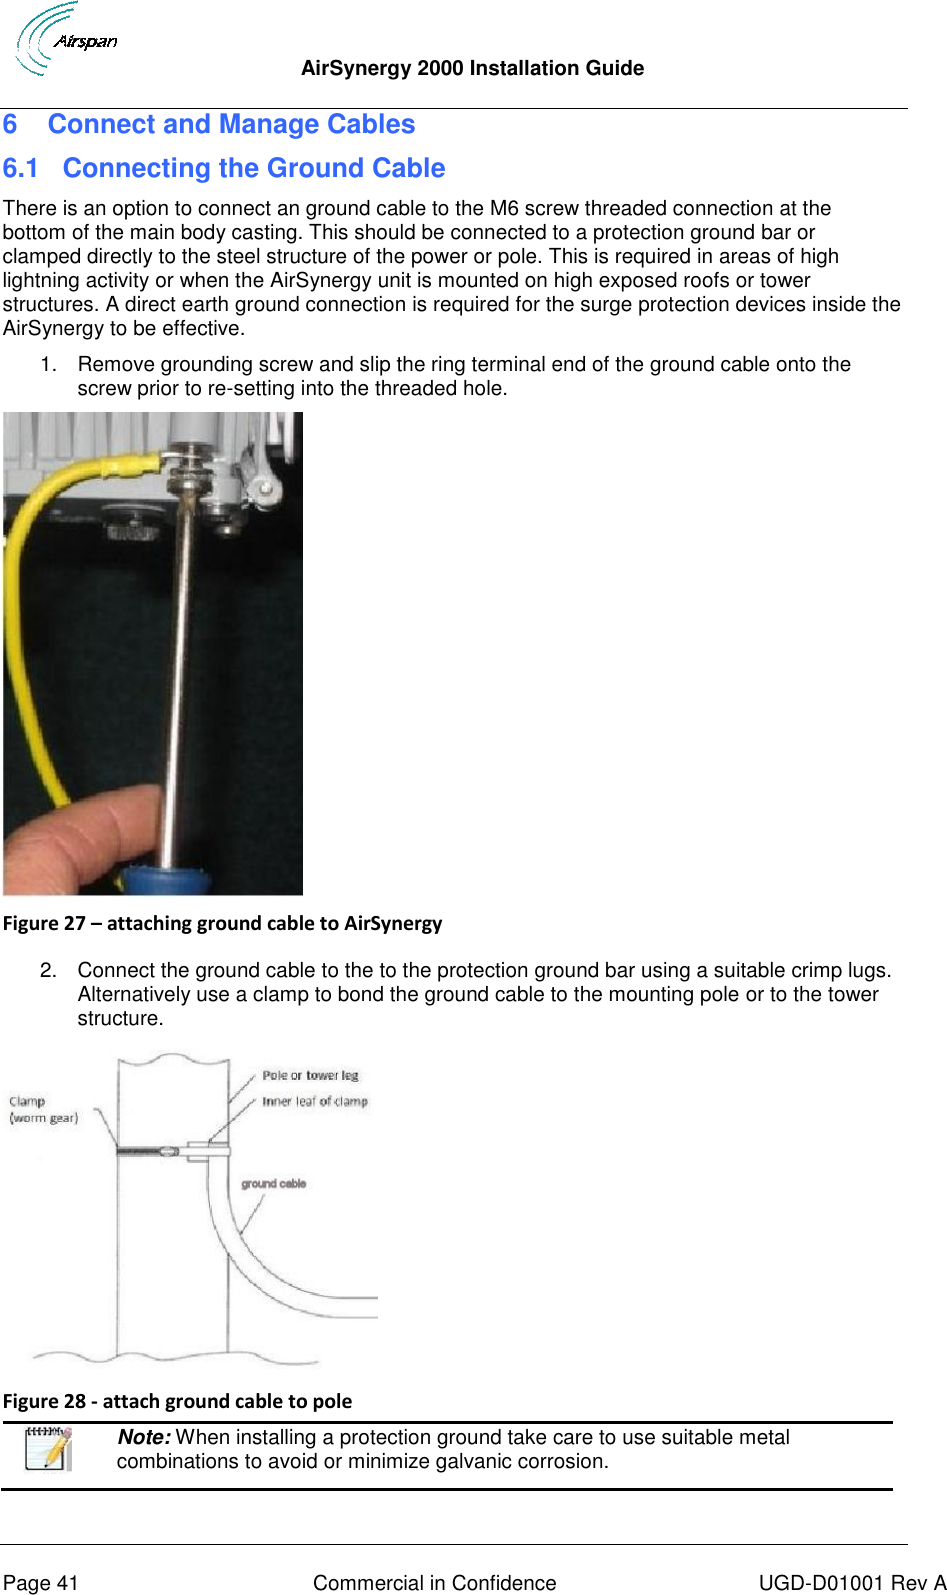  AirSynergy 2000 Installation Guide     Page 41  Commercial in Confidence  UGD-D01001 Rev A 6  Connect and Manage Cables 6.1 Connecting the Ground Cable There is an option to connect an ground cable to the M6 screw threaded connection at the bottom of the main body casting. This should be connected to a protection ground bar or clamped directly to the steel structure of the power or pole. This is required in areas of high lightning activity or when the AirSynergy unit is mounted on high exposed roofs or tower structures. A direct earth ground connection is required for the surge protection devices inside the AirSynergy to be effective. 1.  Remove grounding screw and slip the ring terminal end of the ground cable onto the screw prior to re-setting into the threaded hole.   Figure 27 – attaching ground cable to AirSynergy  2.  Connect the ground cable to the to the protection ground bar using a suitable crimp lugs.  Alternatively use a clamp to bond the ground cable to the mounting pole or to the tower structure.  Figure 28 - attach ground cable to pole   Note: When installing a protection ground take care to use suitable metal combinations to avoid or minimize galvanic corrosion. 